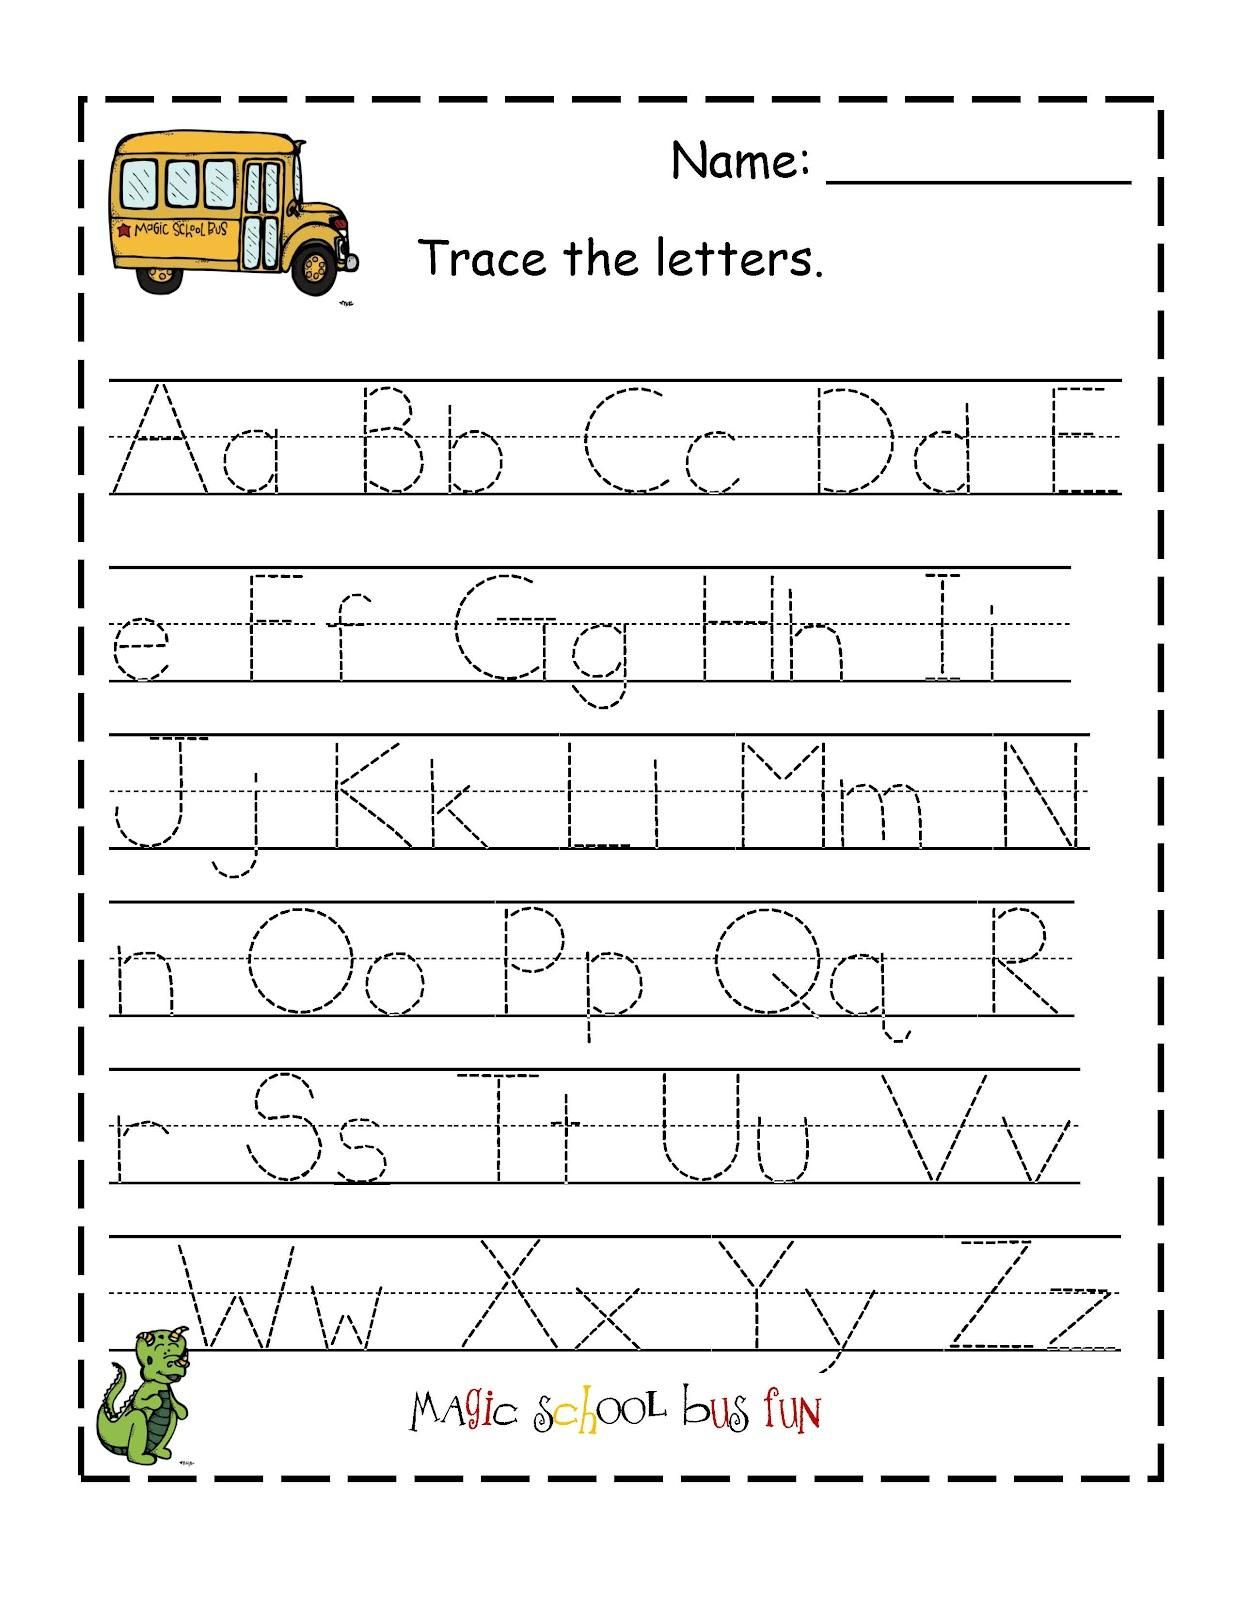 Coloring Book : Printable Letter Tracing Sheets For with regard to Letter Tracing Worksheets For Kindergarten Pdf